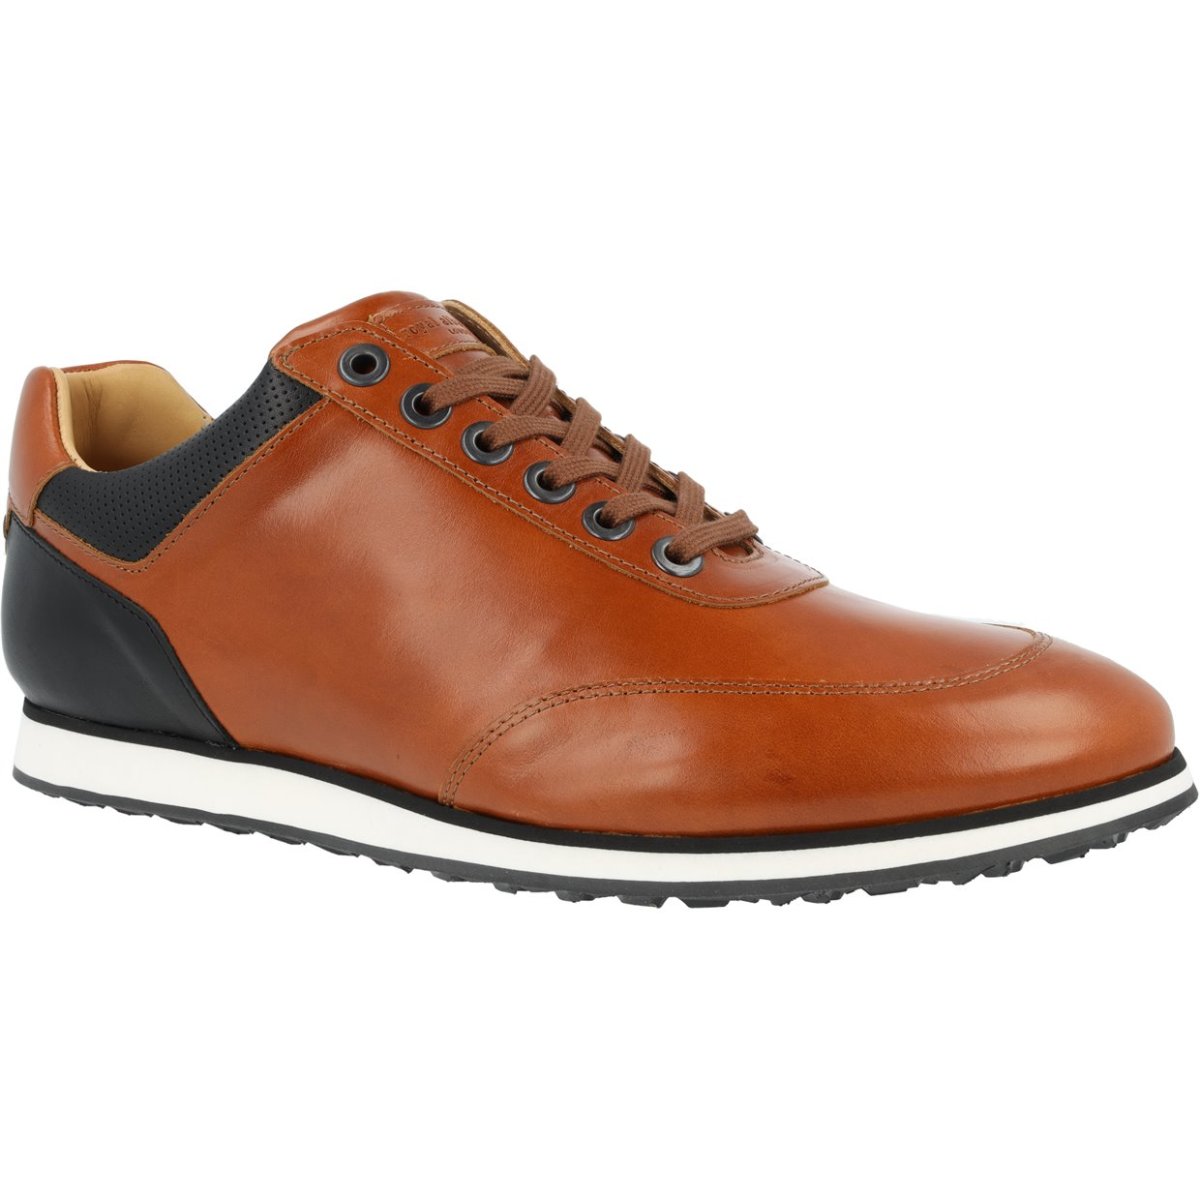 Shop Royal Albartross golf shoes for men and women on Sports Illustrated Golf.